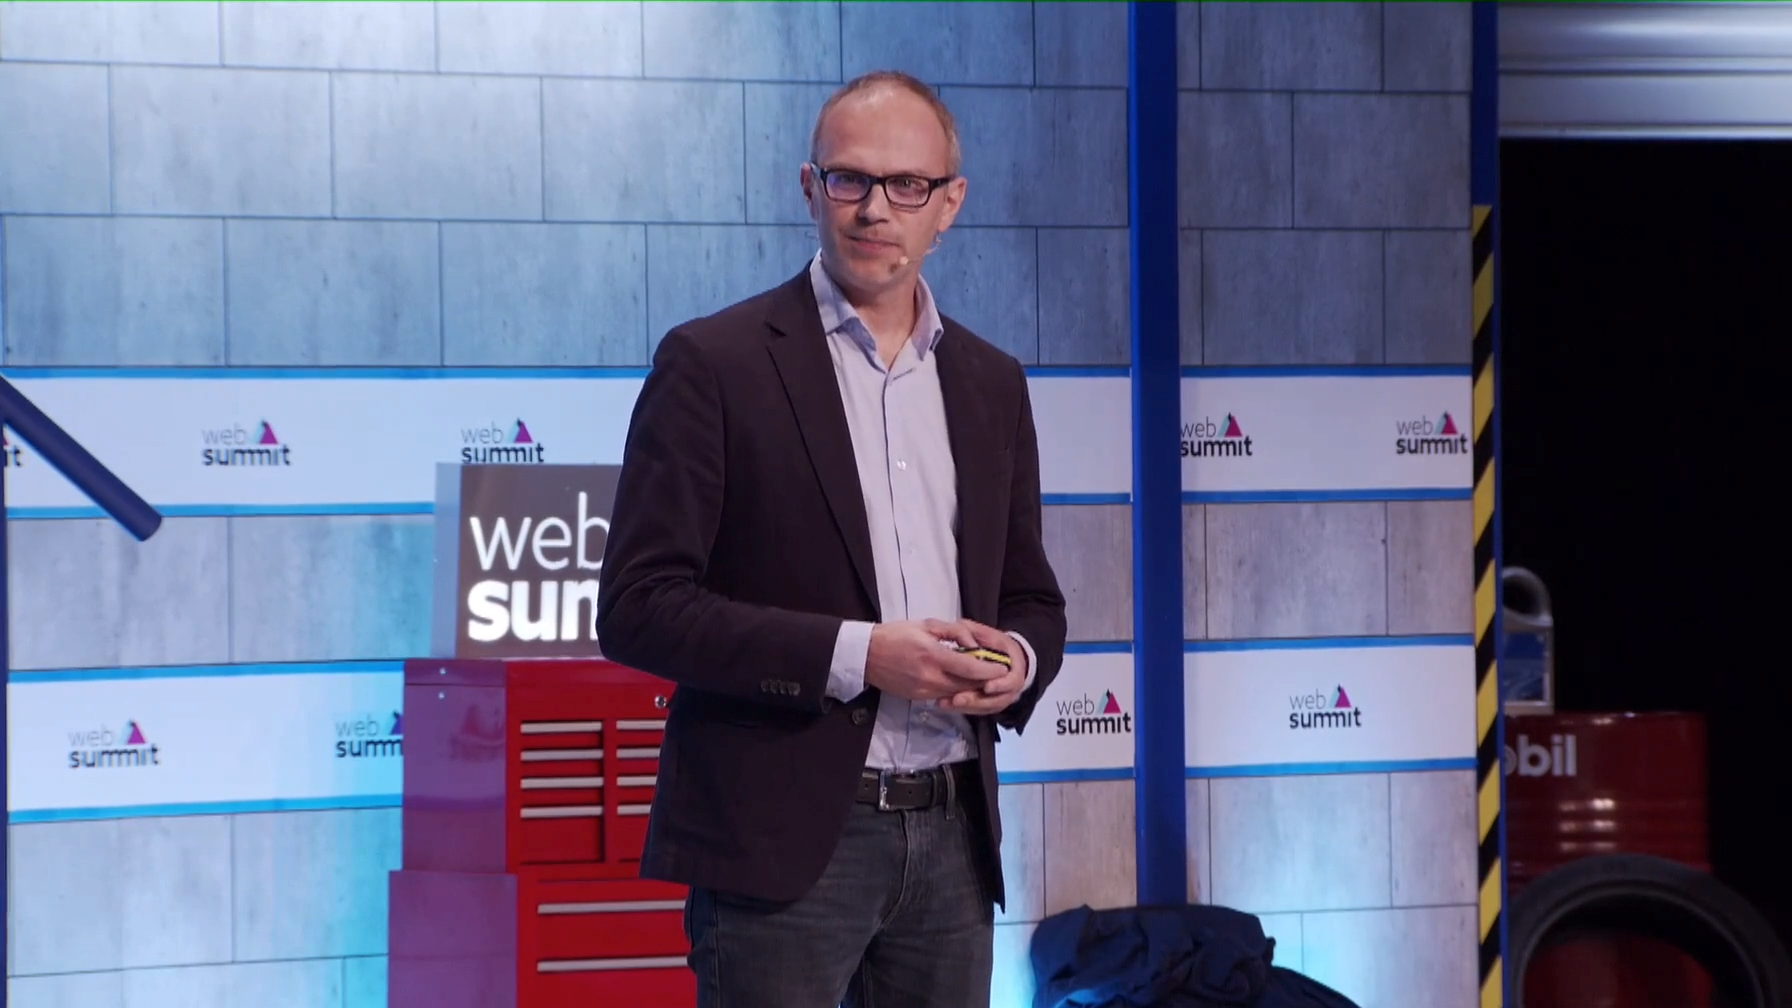 Live from Web Summit! A World Tour of How Shared & Electric Mobility Transforms the City